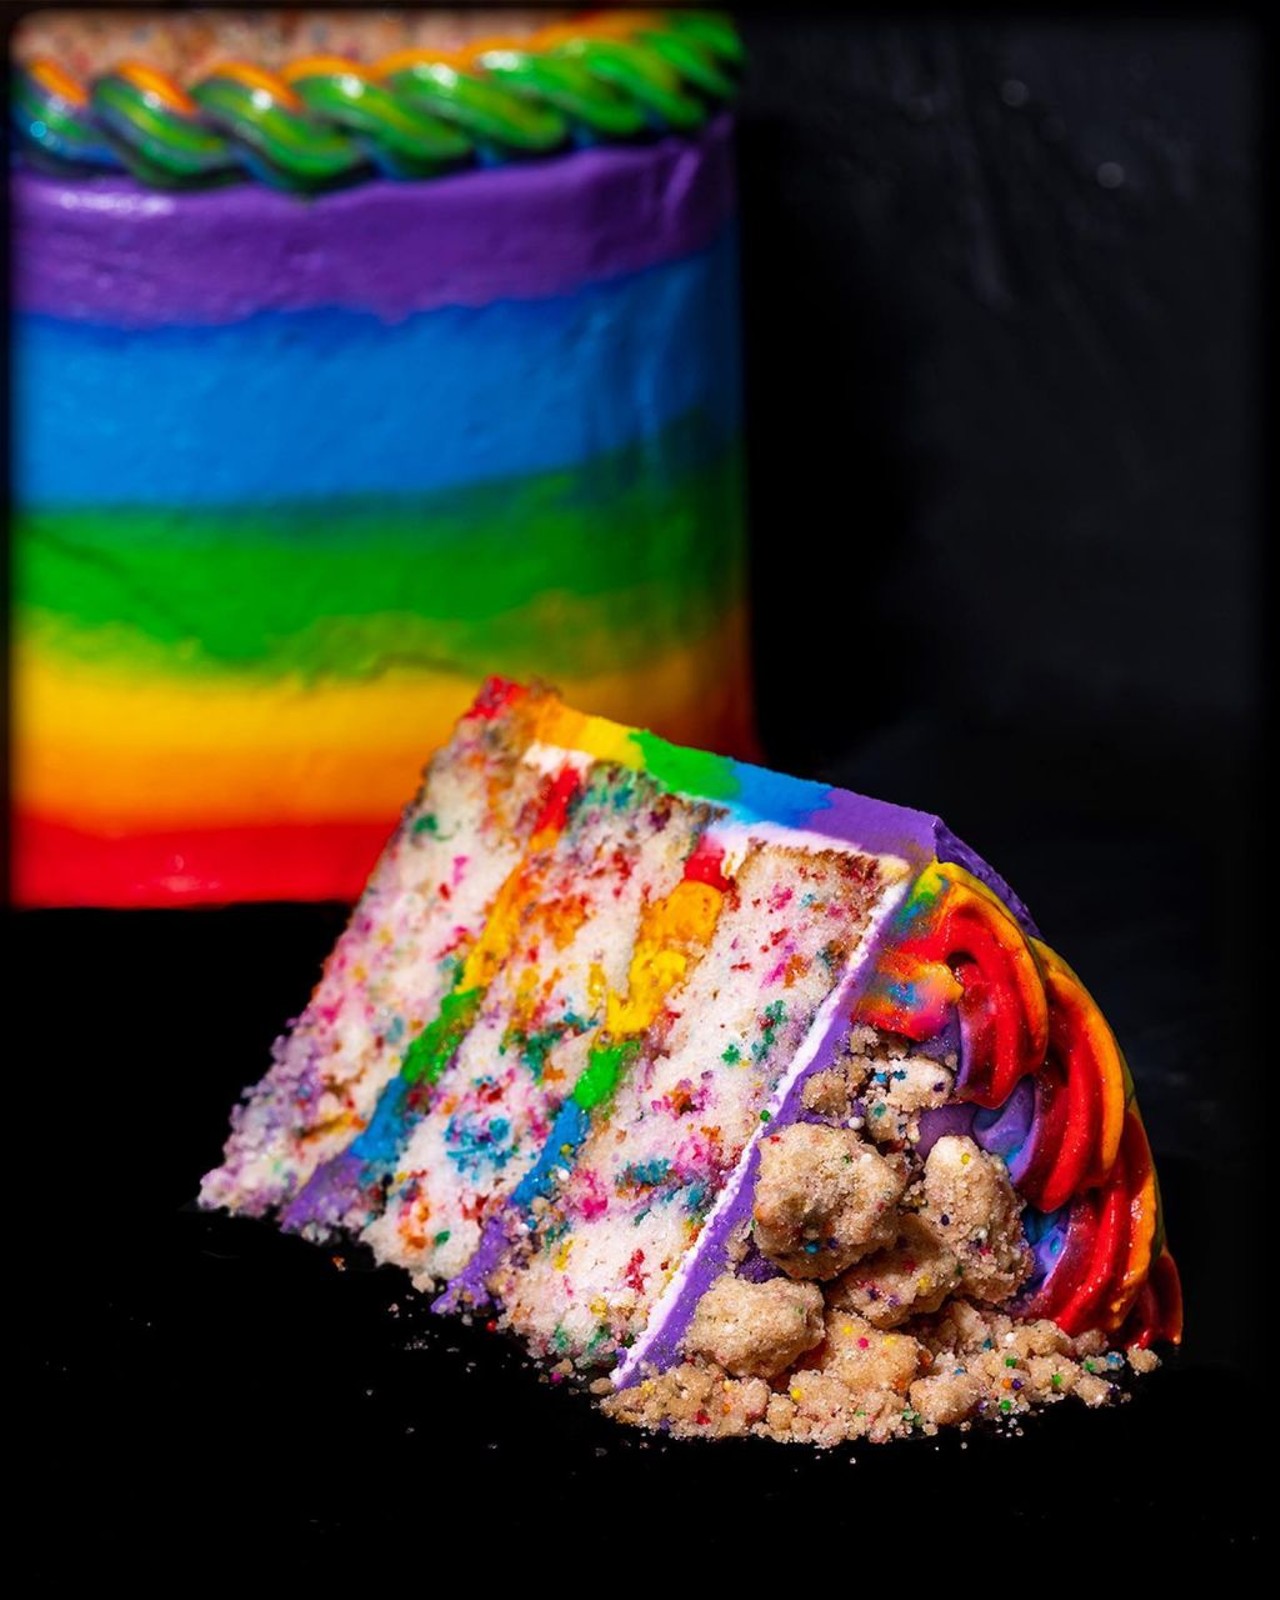 Gideon&#146;s Bakehouse 
1600 Buena Vista Dr, Lake Buena Vista, FL 32830, 3201 Corrine Dr, Orlando, FL 32803
Gideon is celebrating Pride Month with a delicious Rainbow Crunch cake. This cake is a 3-layer vanilla confetti cake covered with multi-colored marshmallow buttercream and laced with rainbow crumbs. It is first come, first served and available until supply lasts. 
Photo via Gideon&#146;s Bakehouse/Facebook